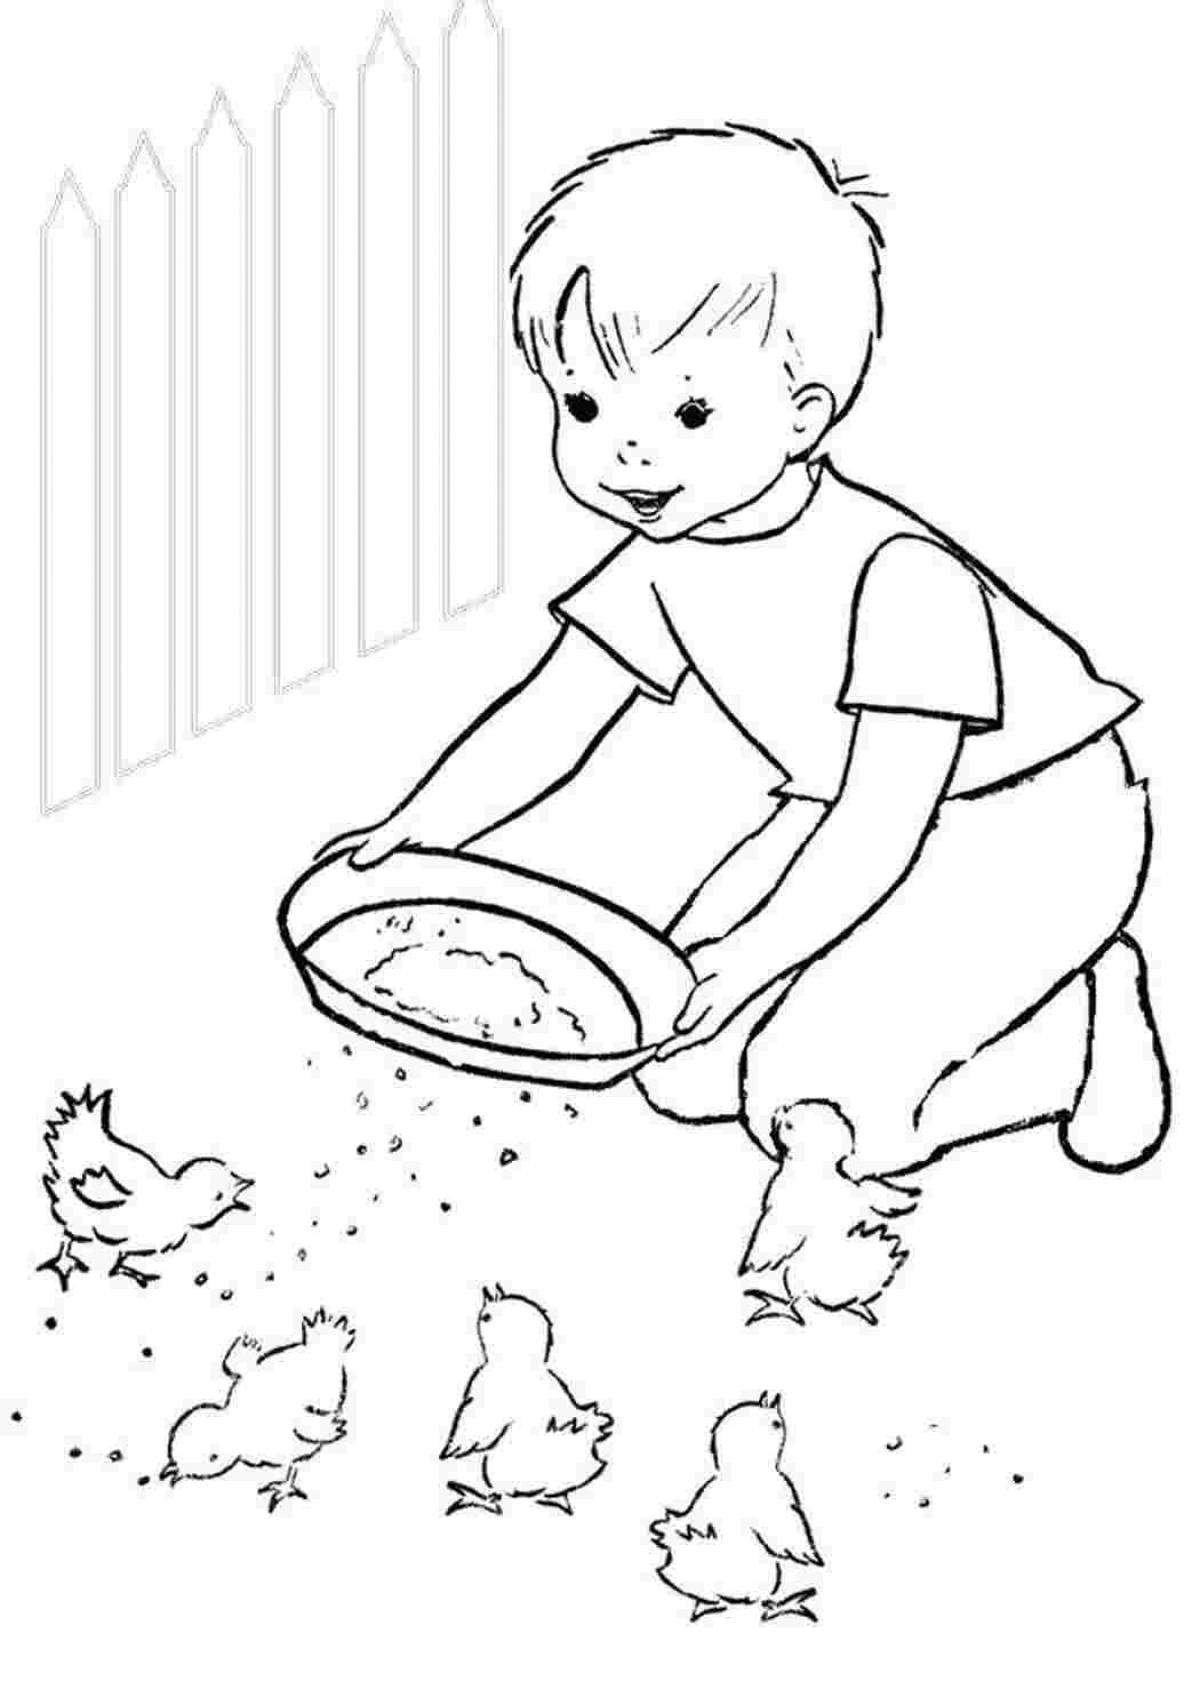 Coloring book funny things for kids